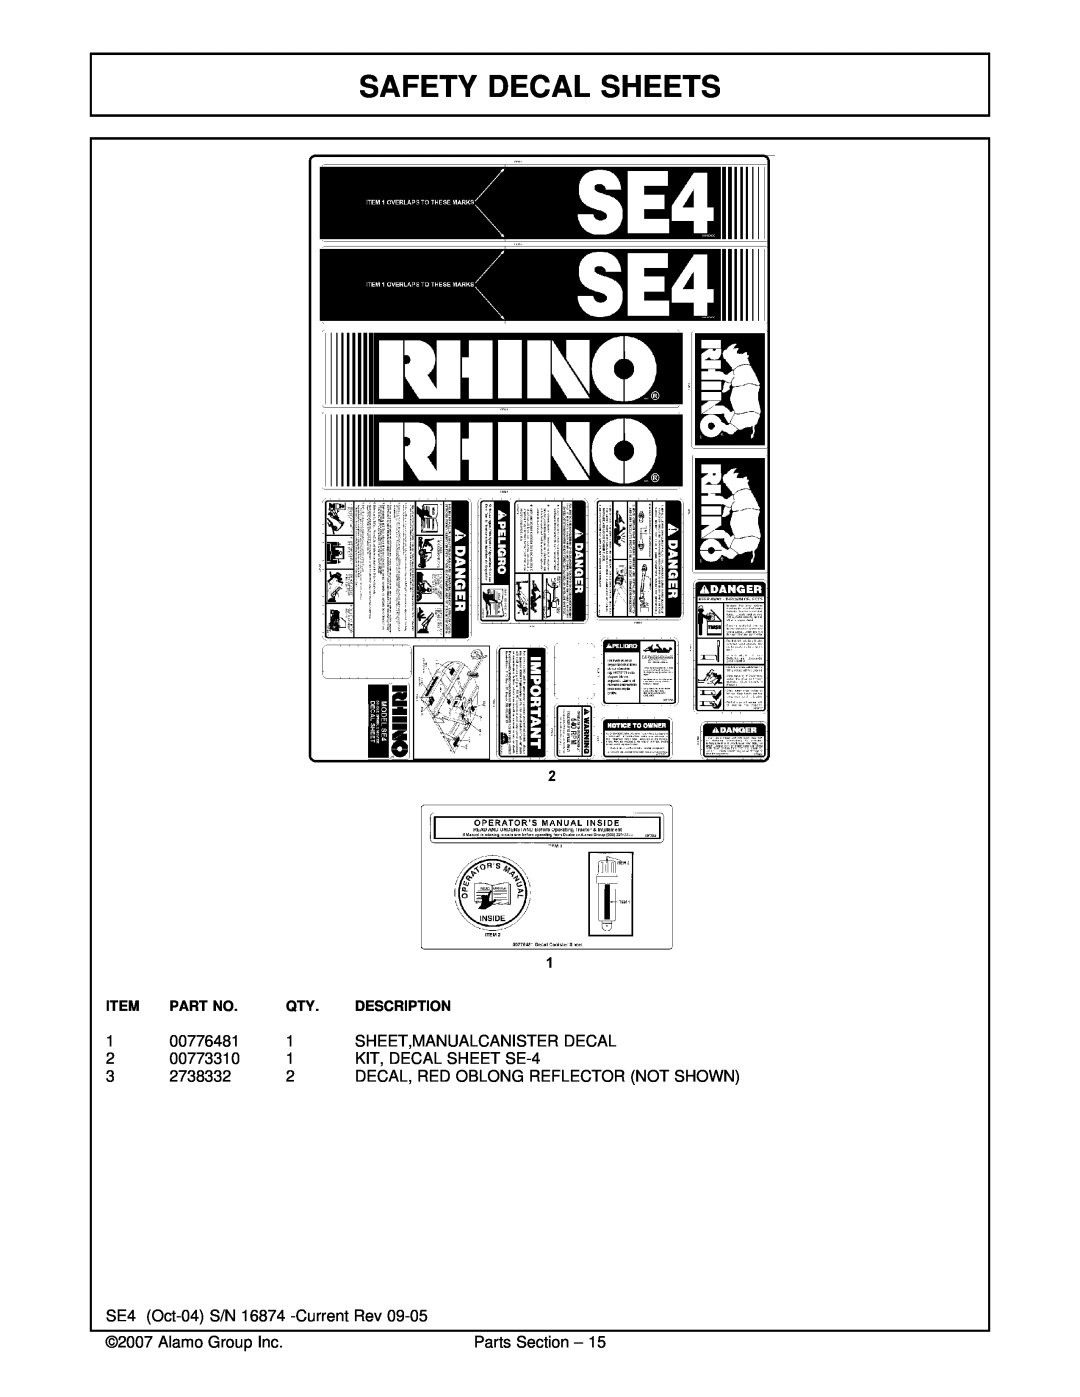 Servis-Rhino SE4 manual Safety Decal Sheets 